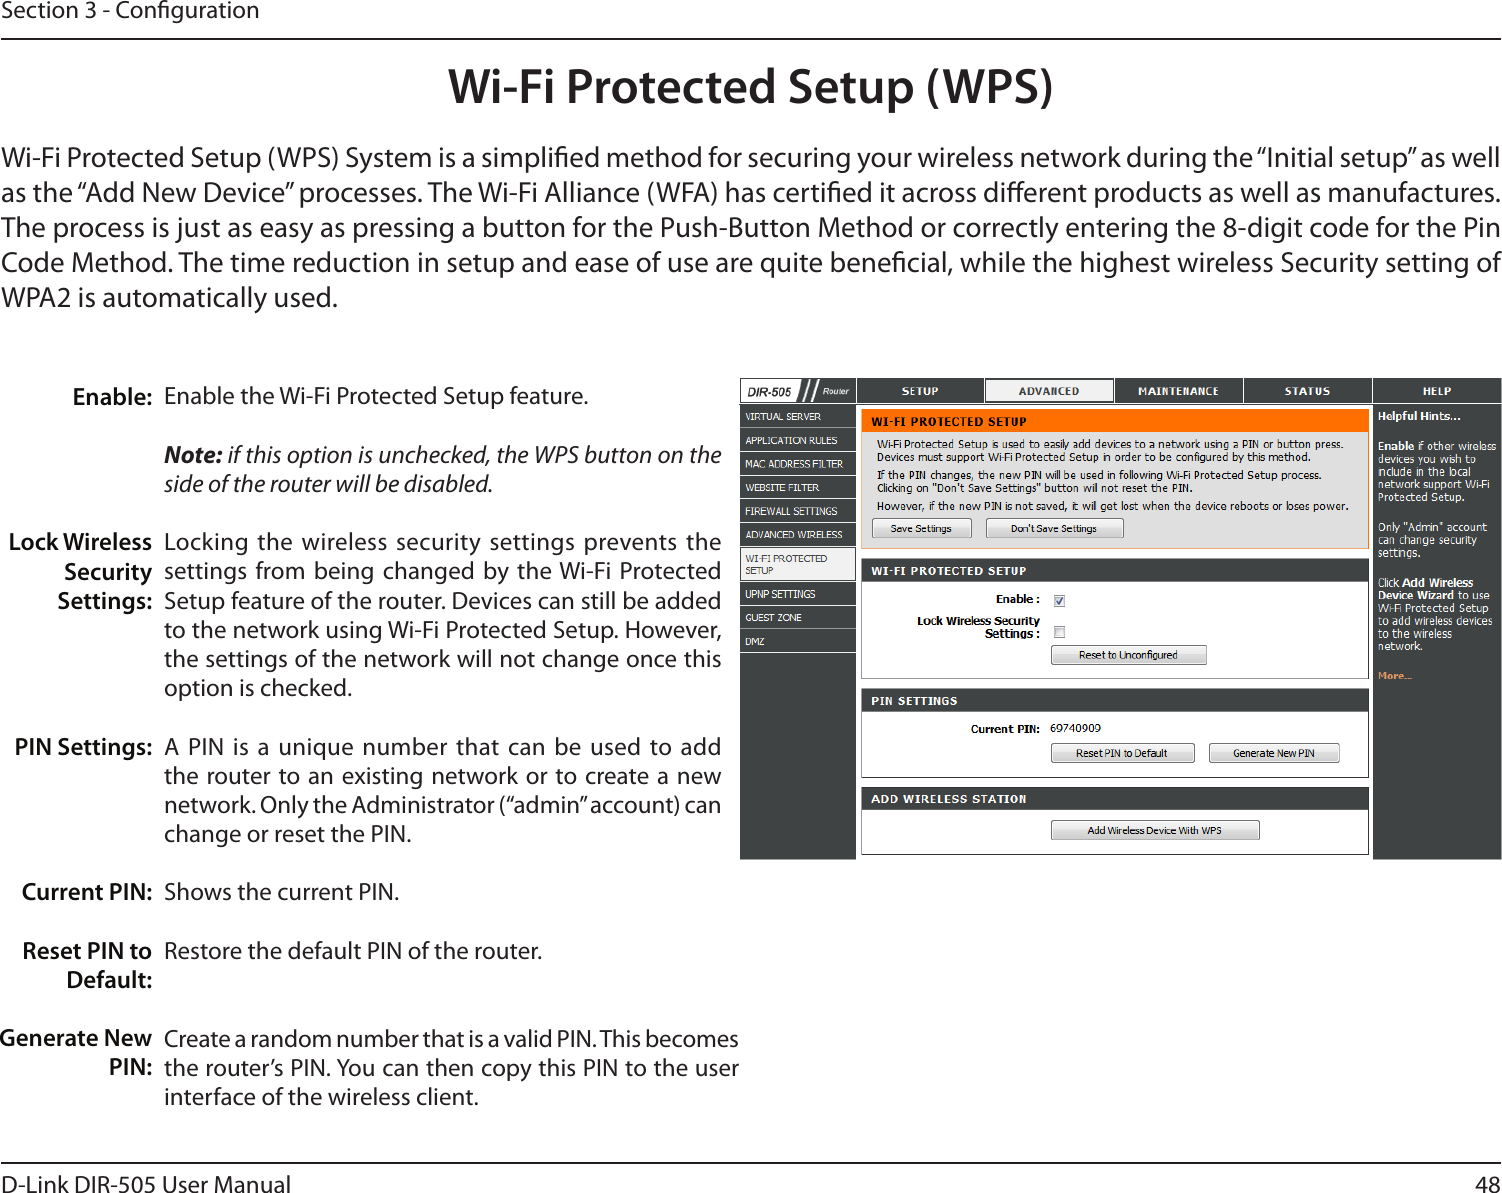 48D-Link DIR-505 User ManualSection 3 - CongurationWi-Fi Protected Setup (WPS)Enable the Wi-Fi Protected Setup feature. Note: if this option is unchecked, the WPS button on the side of the router will be disabled.Locking the  wireless security settings prevents the settings from being  changed by the Wi-Fi Protected Setup feature of the router. Devices can still be added to the network using Wi-Fi Protected Setup. However, the settings of the network will not change once this option is checked.A PIN  is a  unique number that can be used to add the router to an existing network or to create a new network. Only the Administrator (“admin” account) can change or reset the PIN. Shows the current PIN. Restore the default PIN of the router. Create a random number that is a valid PIN. This becomes the router’s PIN. You can then copy this PIN to the user interface of the wireless client.Enable:Lock Wireless Security Settings:PIN Settings:Current PIN:Reset PIN to Default:Generate New PIN:Wi-Fi Protected Setup (WPS) System is a simplied method for securing your wireless network during the “Initial setup” as well as the “Add New Device” processes. The Wi-Fi Alliance (WFA) has certied it across dierent products as well as manufactures. The process is just as easy as pressing a button for the Push-Button Method or correctly entering the 8-digit code for the Pin Code Method. The time reduction in setup and ease of use are quite benecial, while the highest wireless Security setting of WPA2 is automatically used.